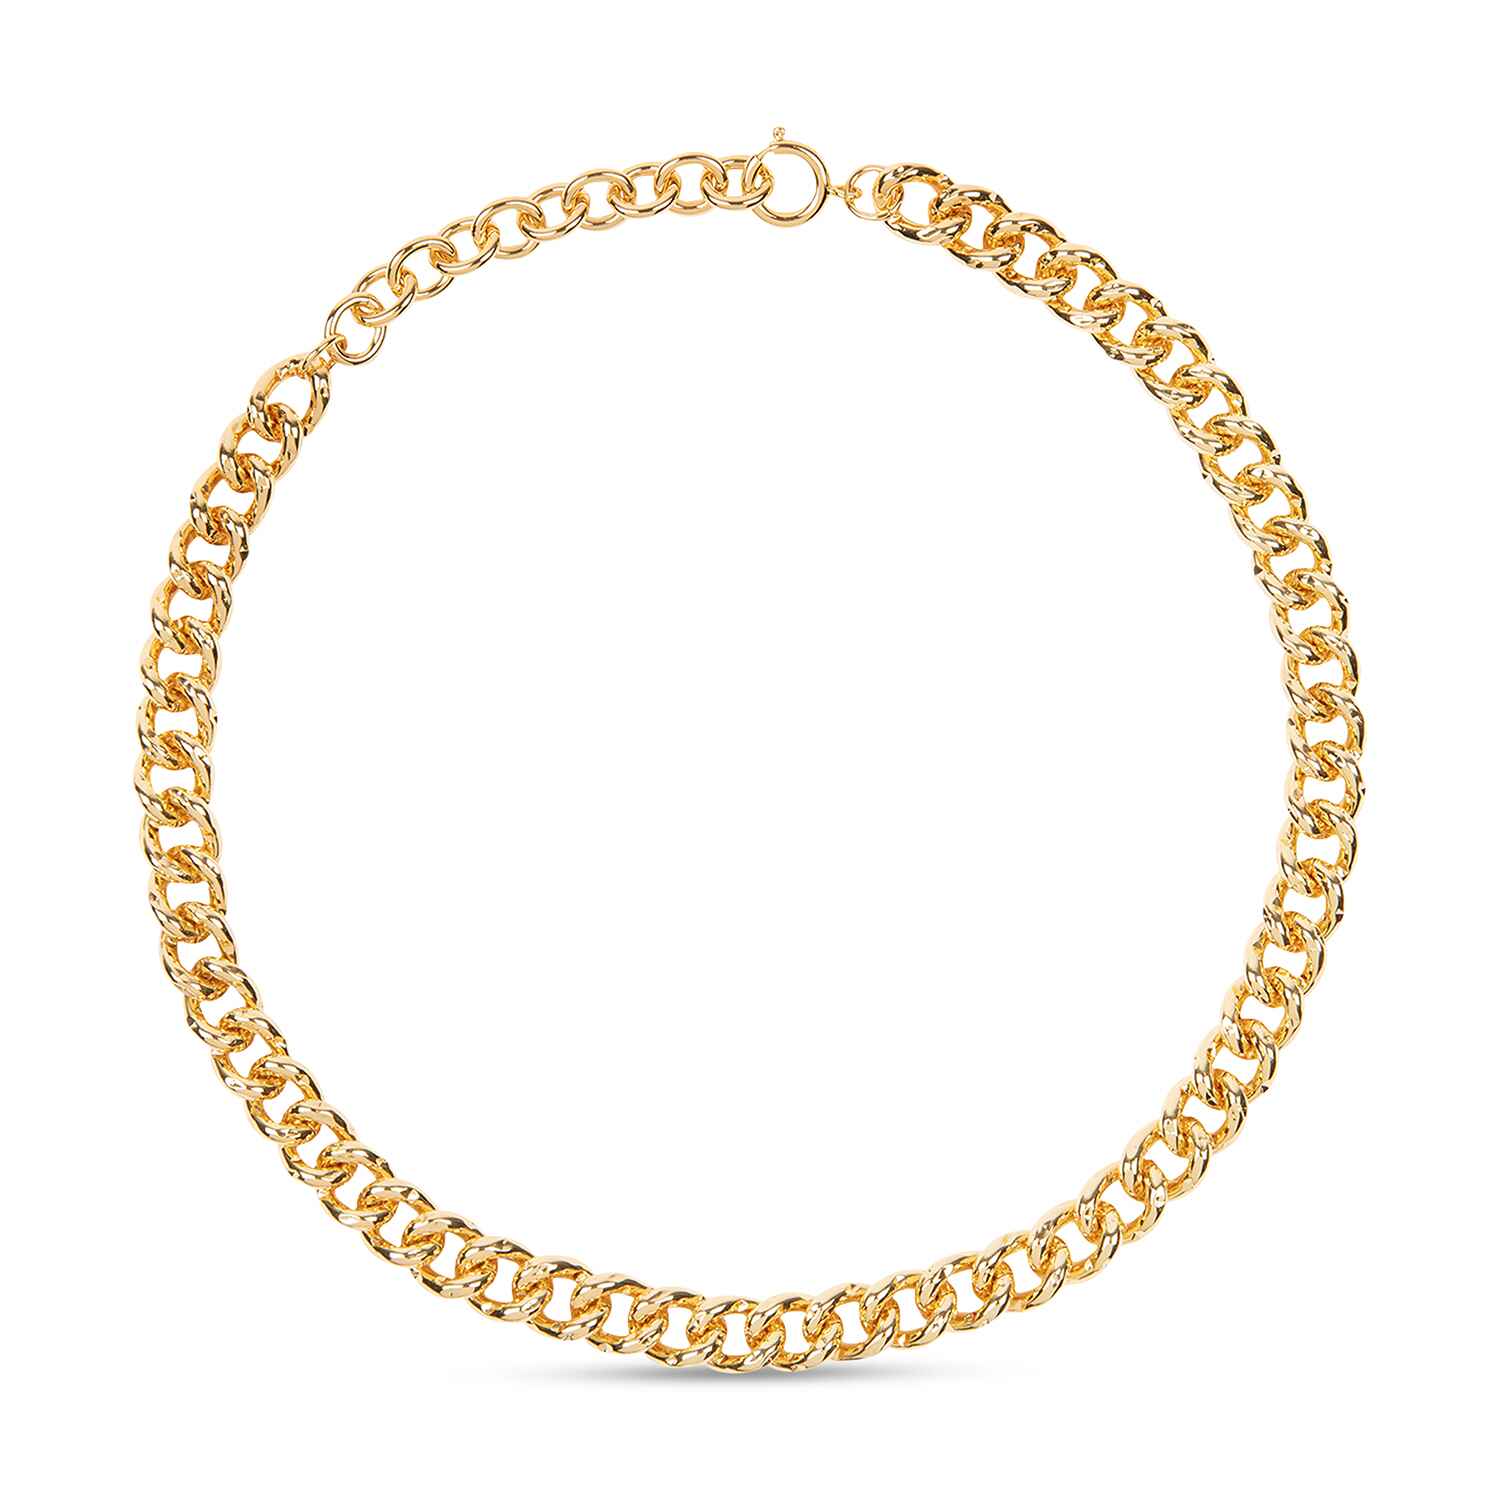 A chunky recycled gold chain is a perfect sustainable jewellery staple. This Gia Thick Gold Chain Necklace is a statement chain designed to be worn at the chest, perfect for layering with other necklaces as well as a standalone piece.